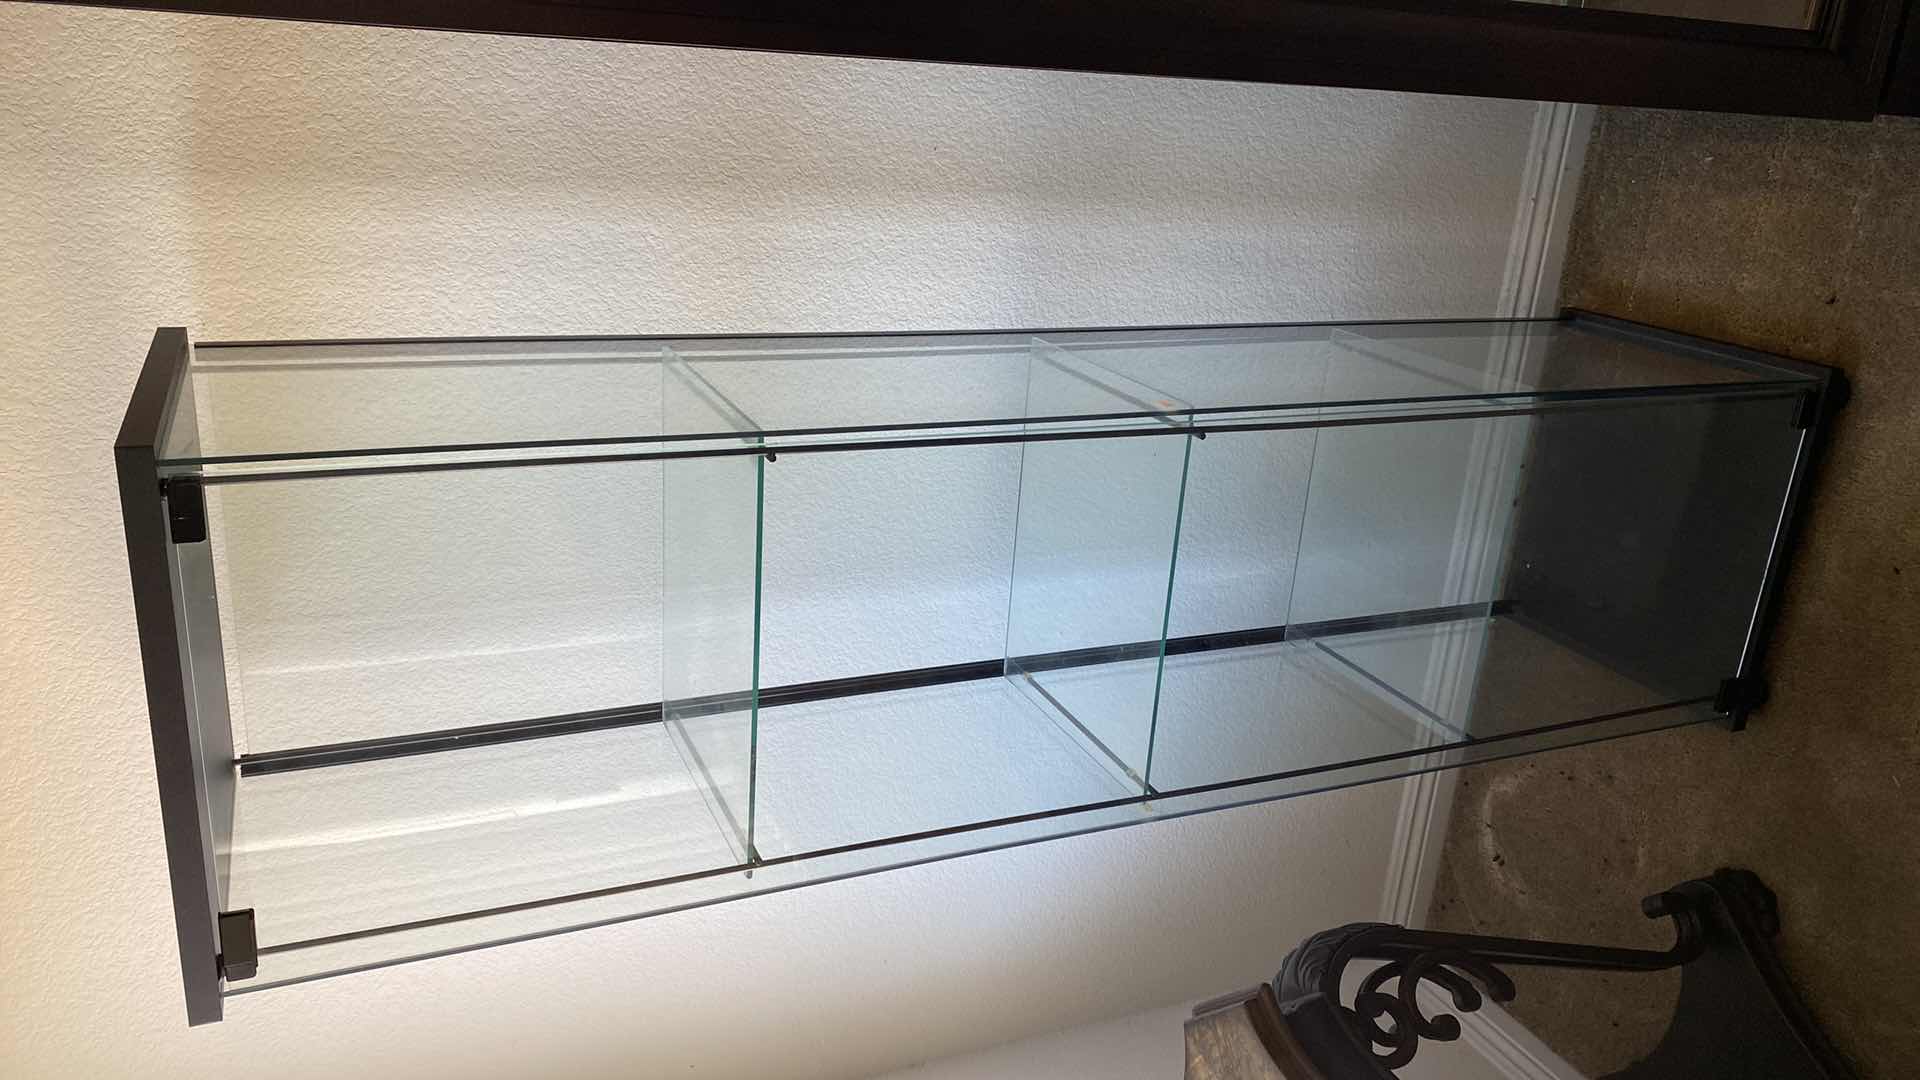 Photo 2 of DISPLAY CASE 3 GLASS SHELVES 16 x 14.5 x 64